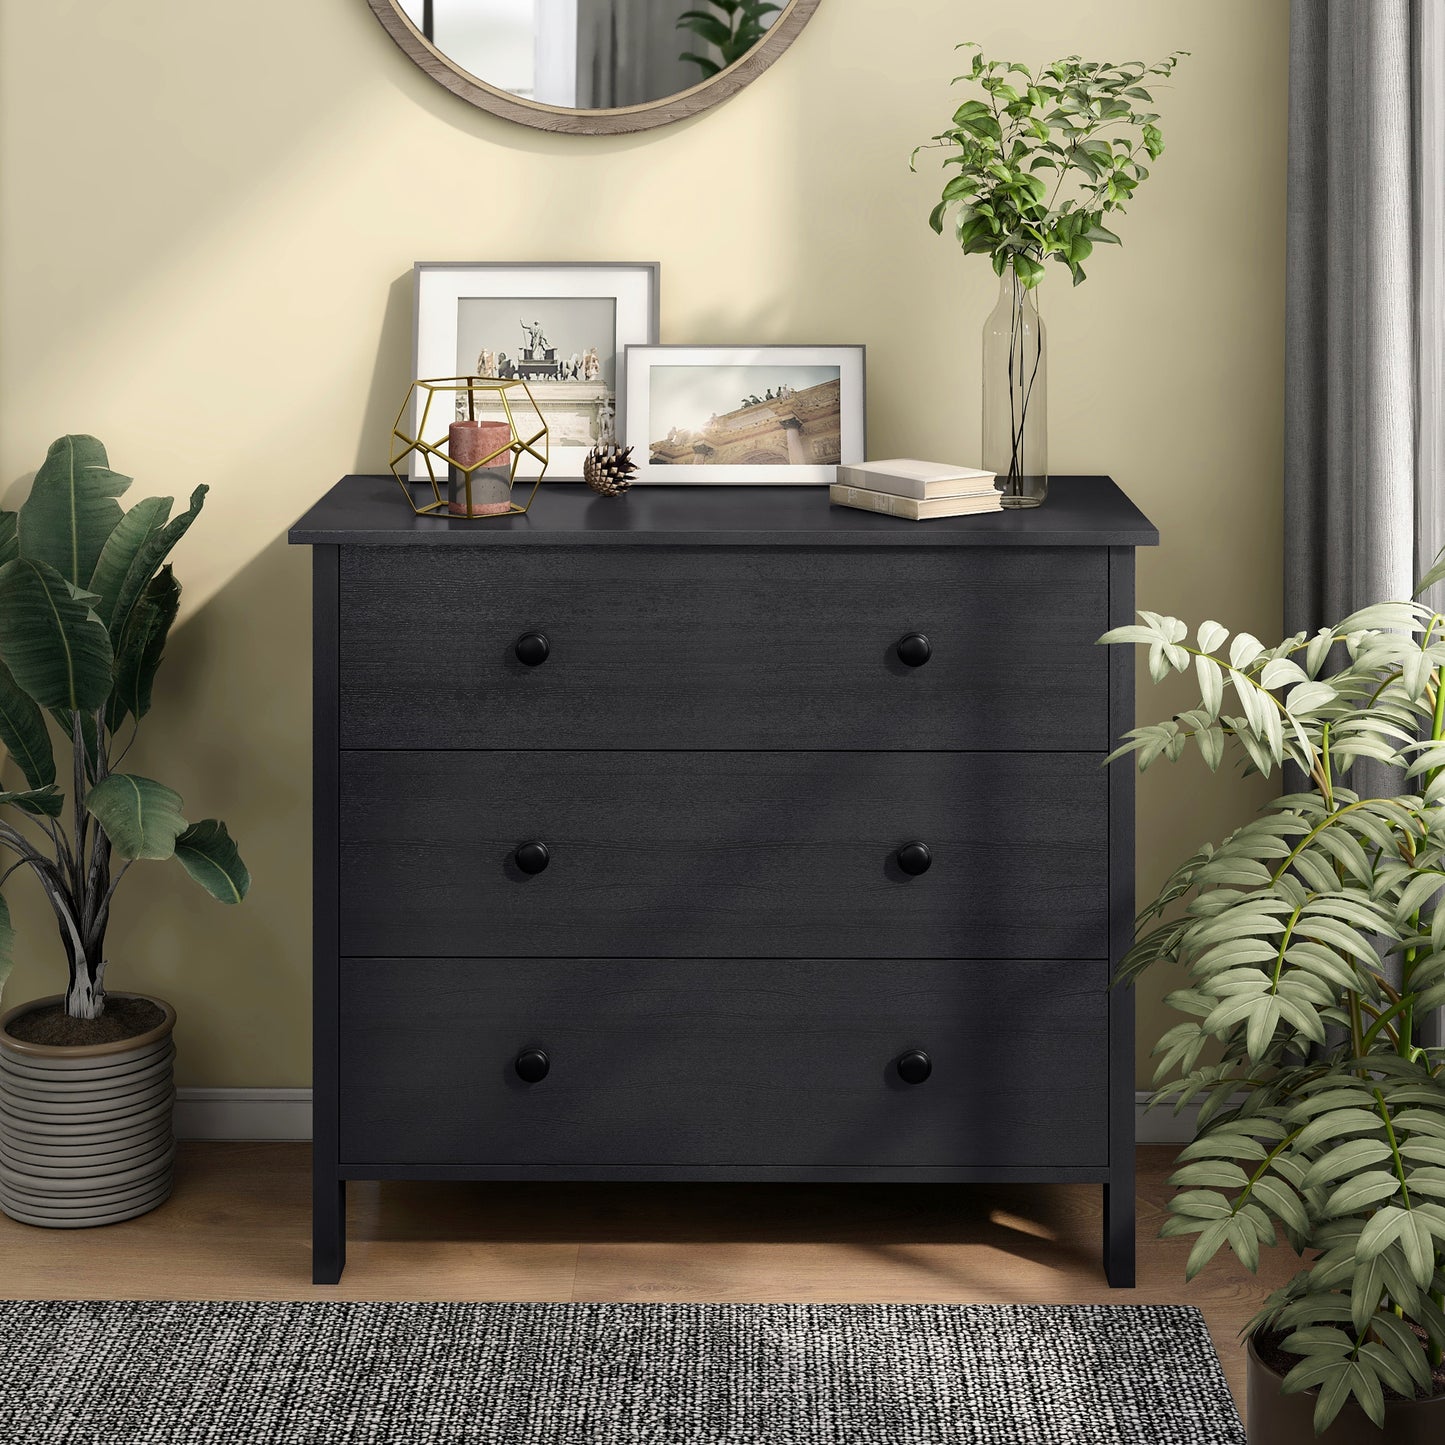 Front-facing transitional black three-drawer youth dresser in a bedroom with accessories